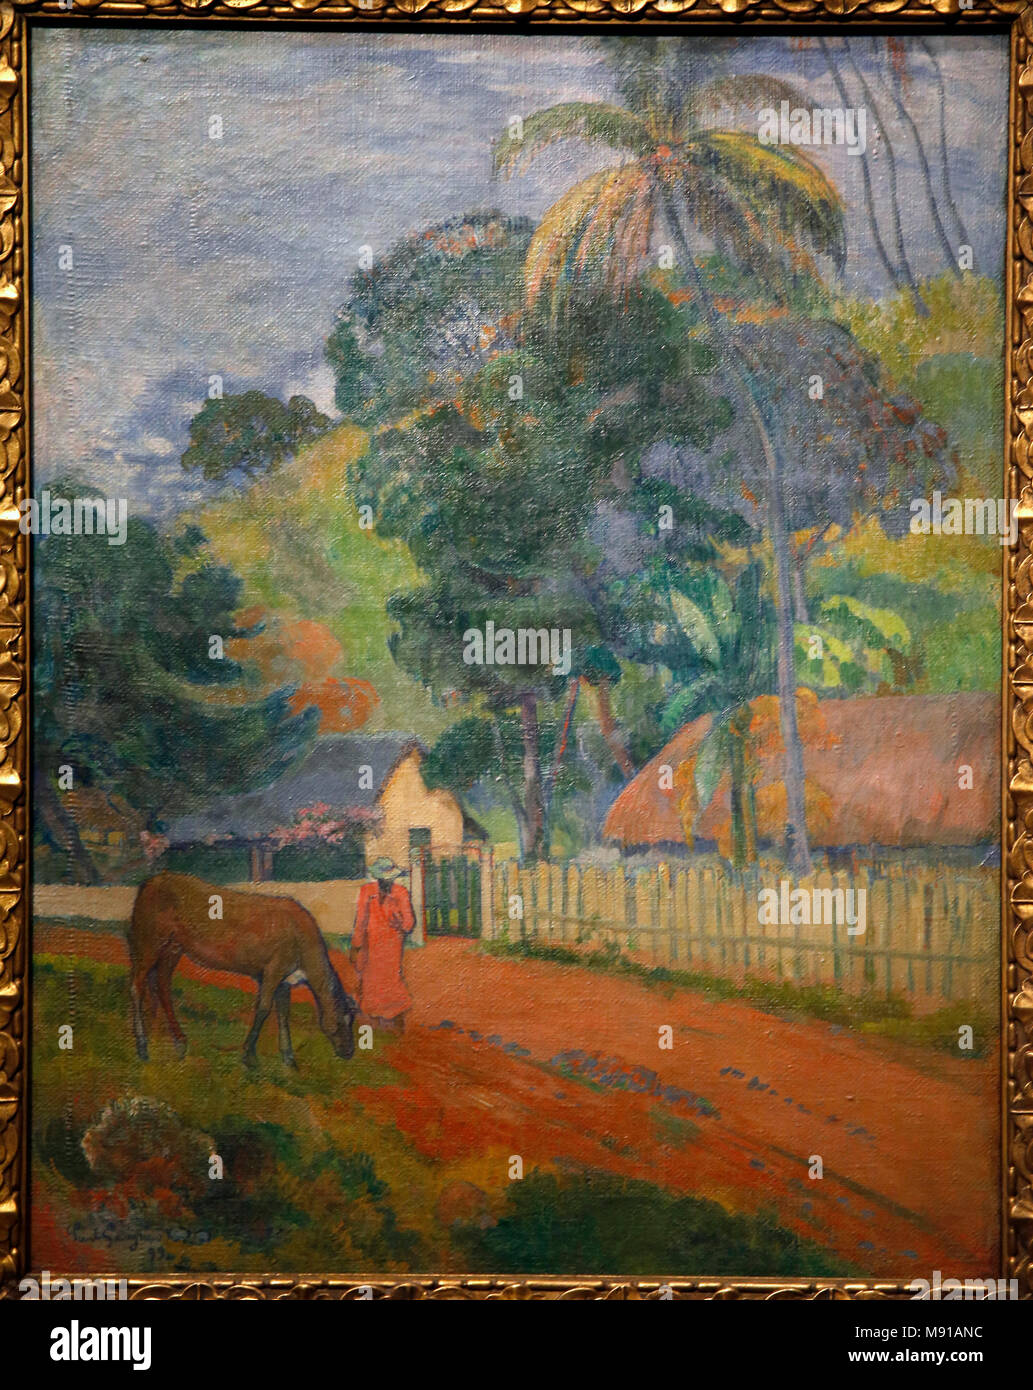 Paul Gauguin, Landscape (A horse on a road, Tahiti), 1899, oil on canvas. Shchukin Collection, Pushkin Fine Art Museum, Moskow. Shot while exhibited i Stock Photo